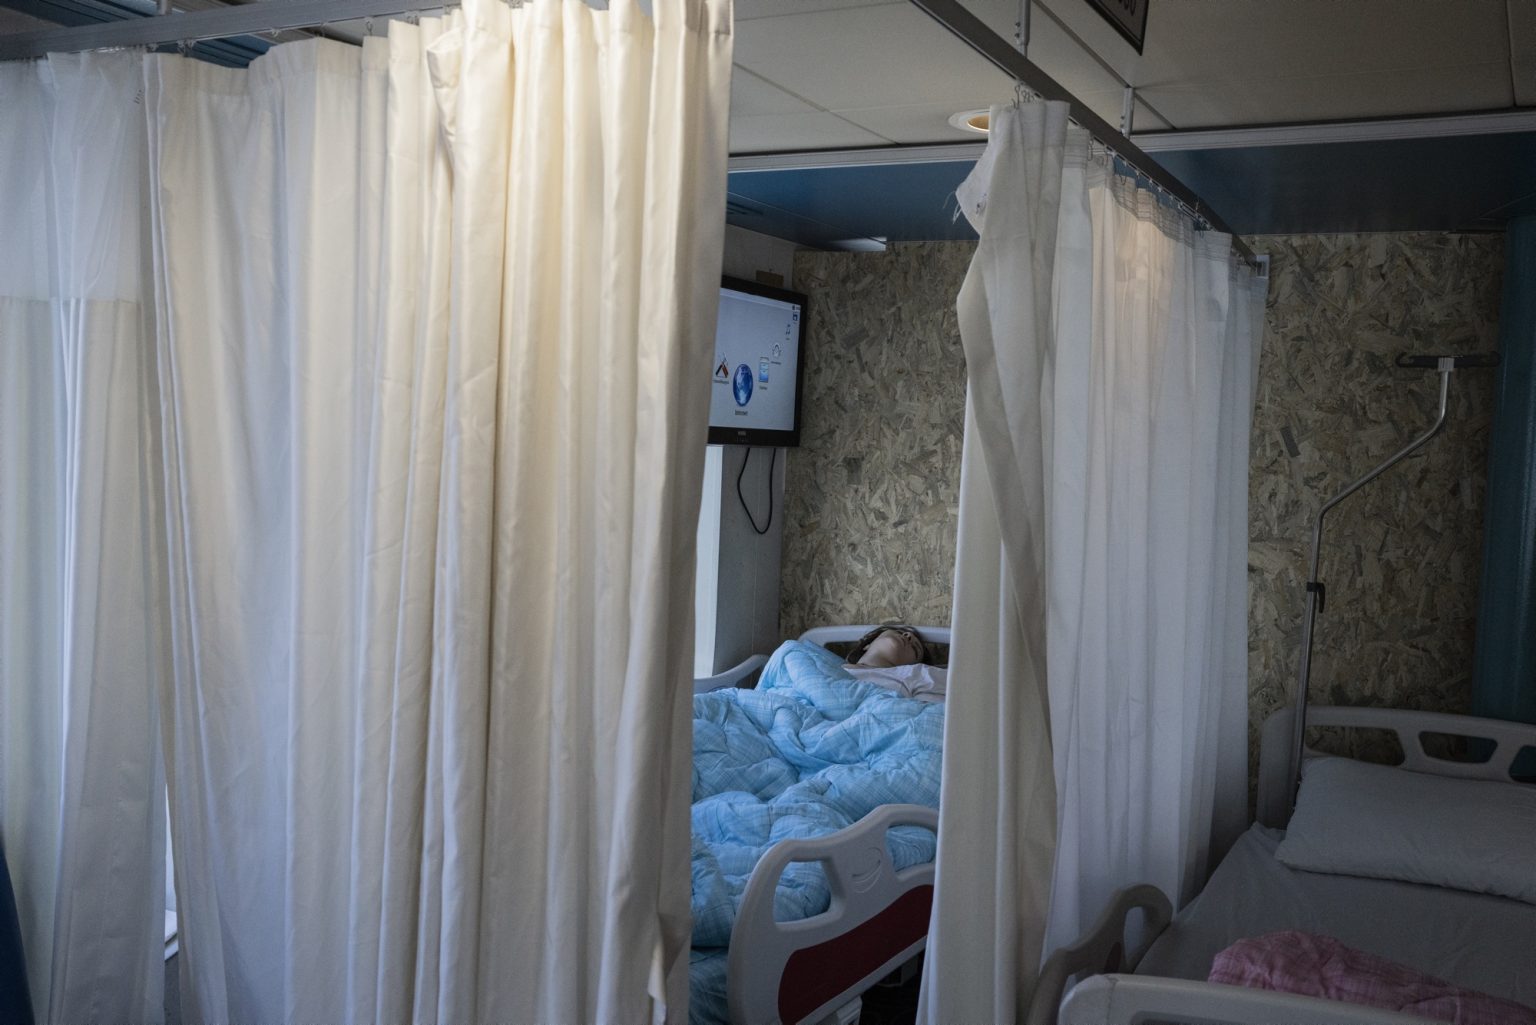 Iskenderun, Turkey, February 2023 - The aftermath of the earthquake that hit southern Turkey and northern Syria. A patient sleeps inside the clinic set up inside the ferry housing displaced people in the city of Iskenderun. ><
Iskenderun, Turchia, febbraio 2023  Le conseguenze del terremoto che ha colpito la Turchia del Sud e la Siria del nord.